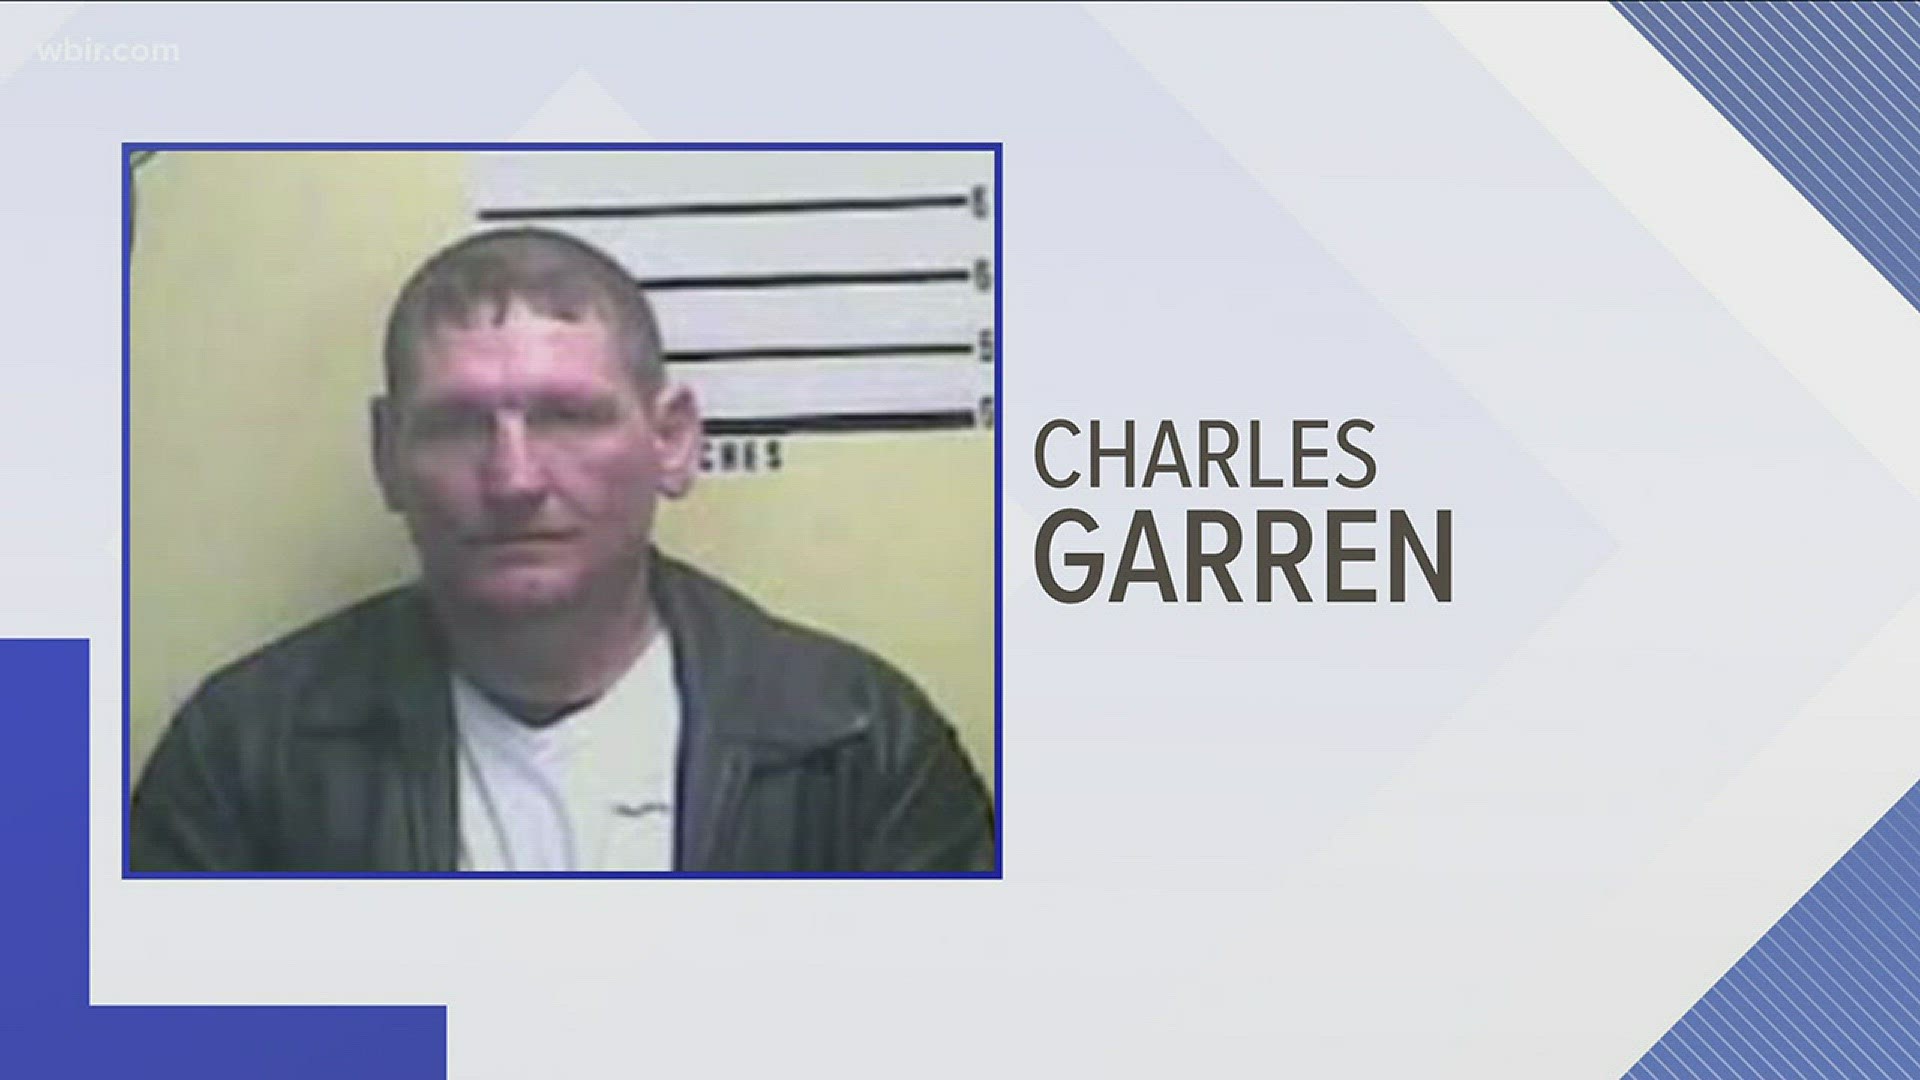 A Bell county, Kentucky man is in jail after he was caught with drugs hidden in his cowboy boots.